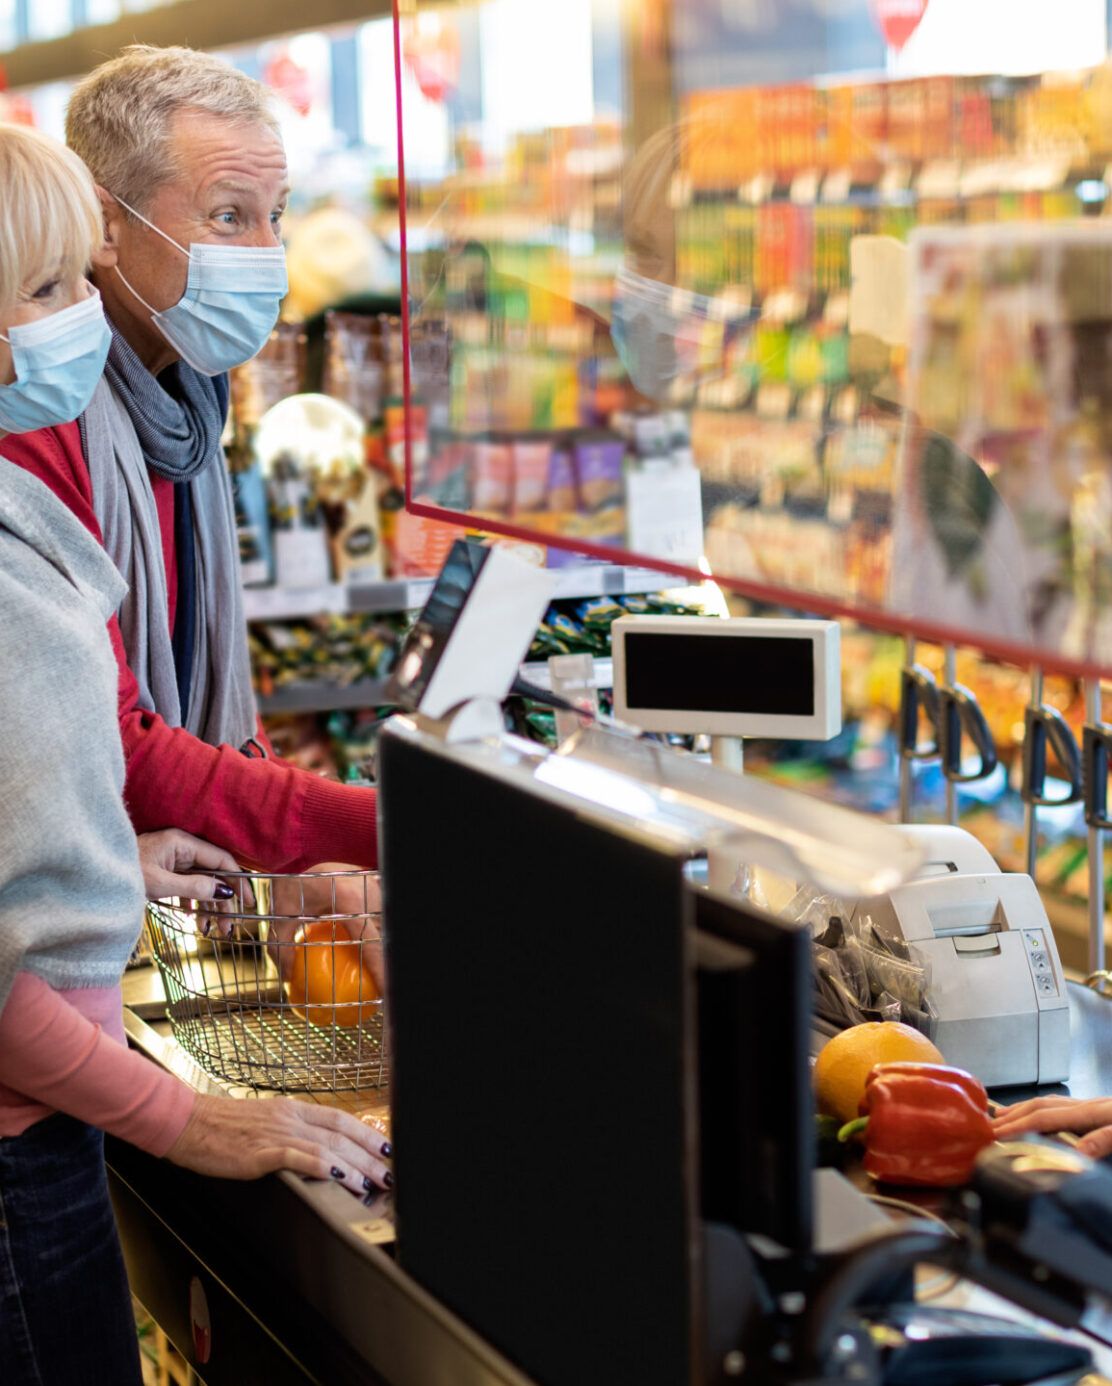 An older couple wearing face masks at the grocery store checkout stand